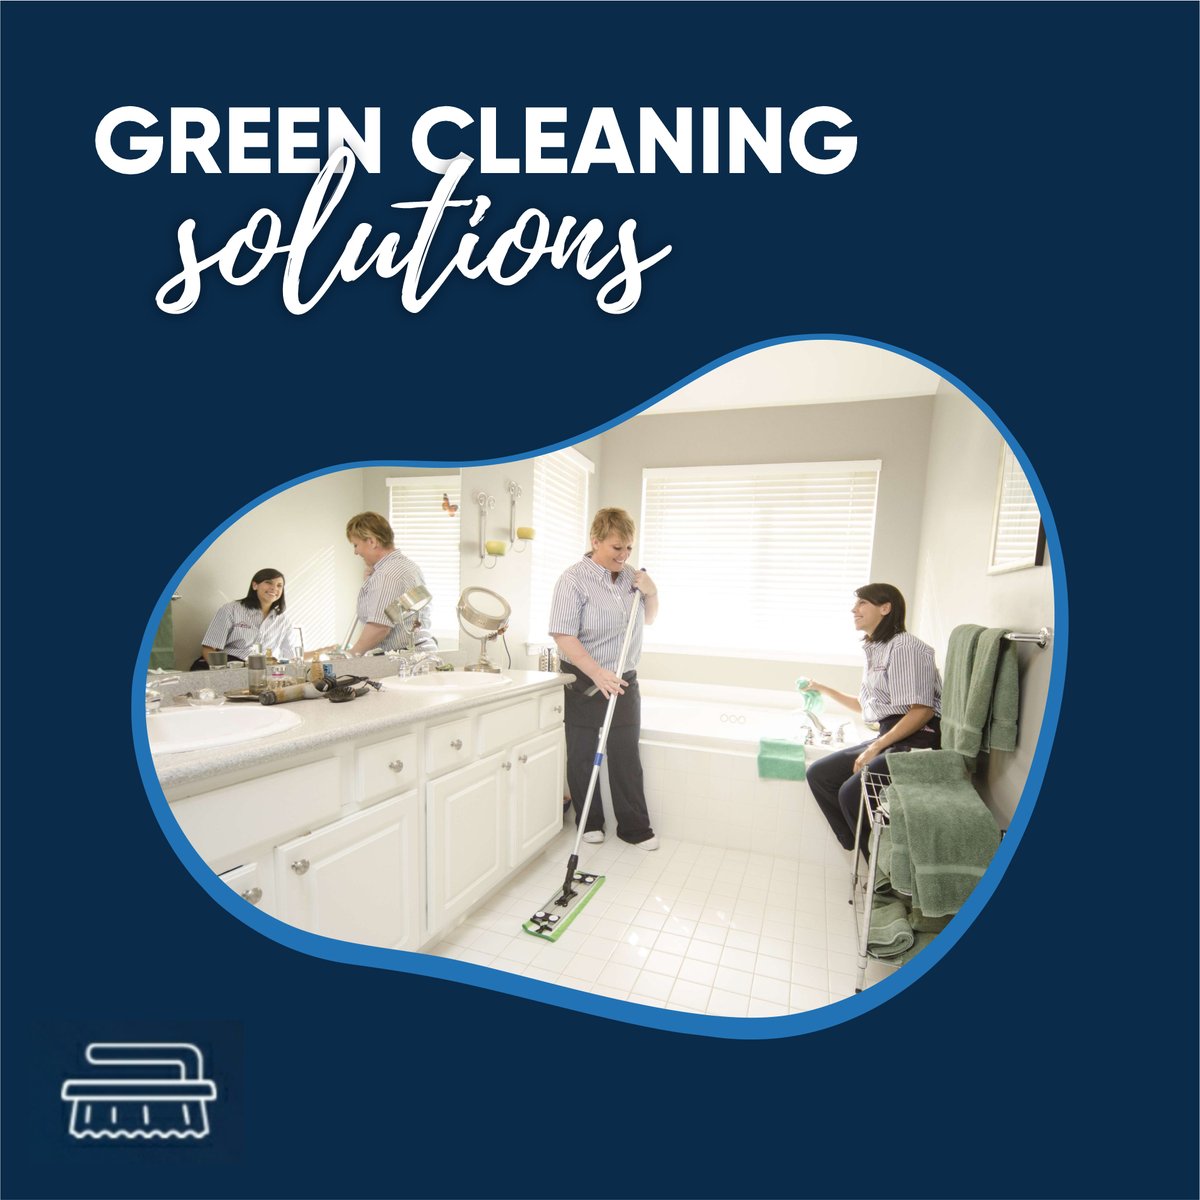 We prioritize the health of our employees and the environment. Our cleaning products are environmentally friendly, ensuring a sustainable and responsible approach to office cleaning.

#GreenCleanOffice #SustainableCleaning #EcoFriendlyWorkplace #HealthyEmployees #EnvironmentFirst